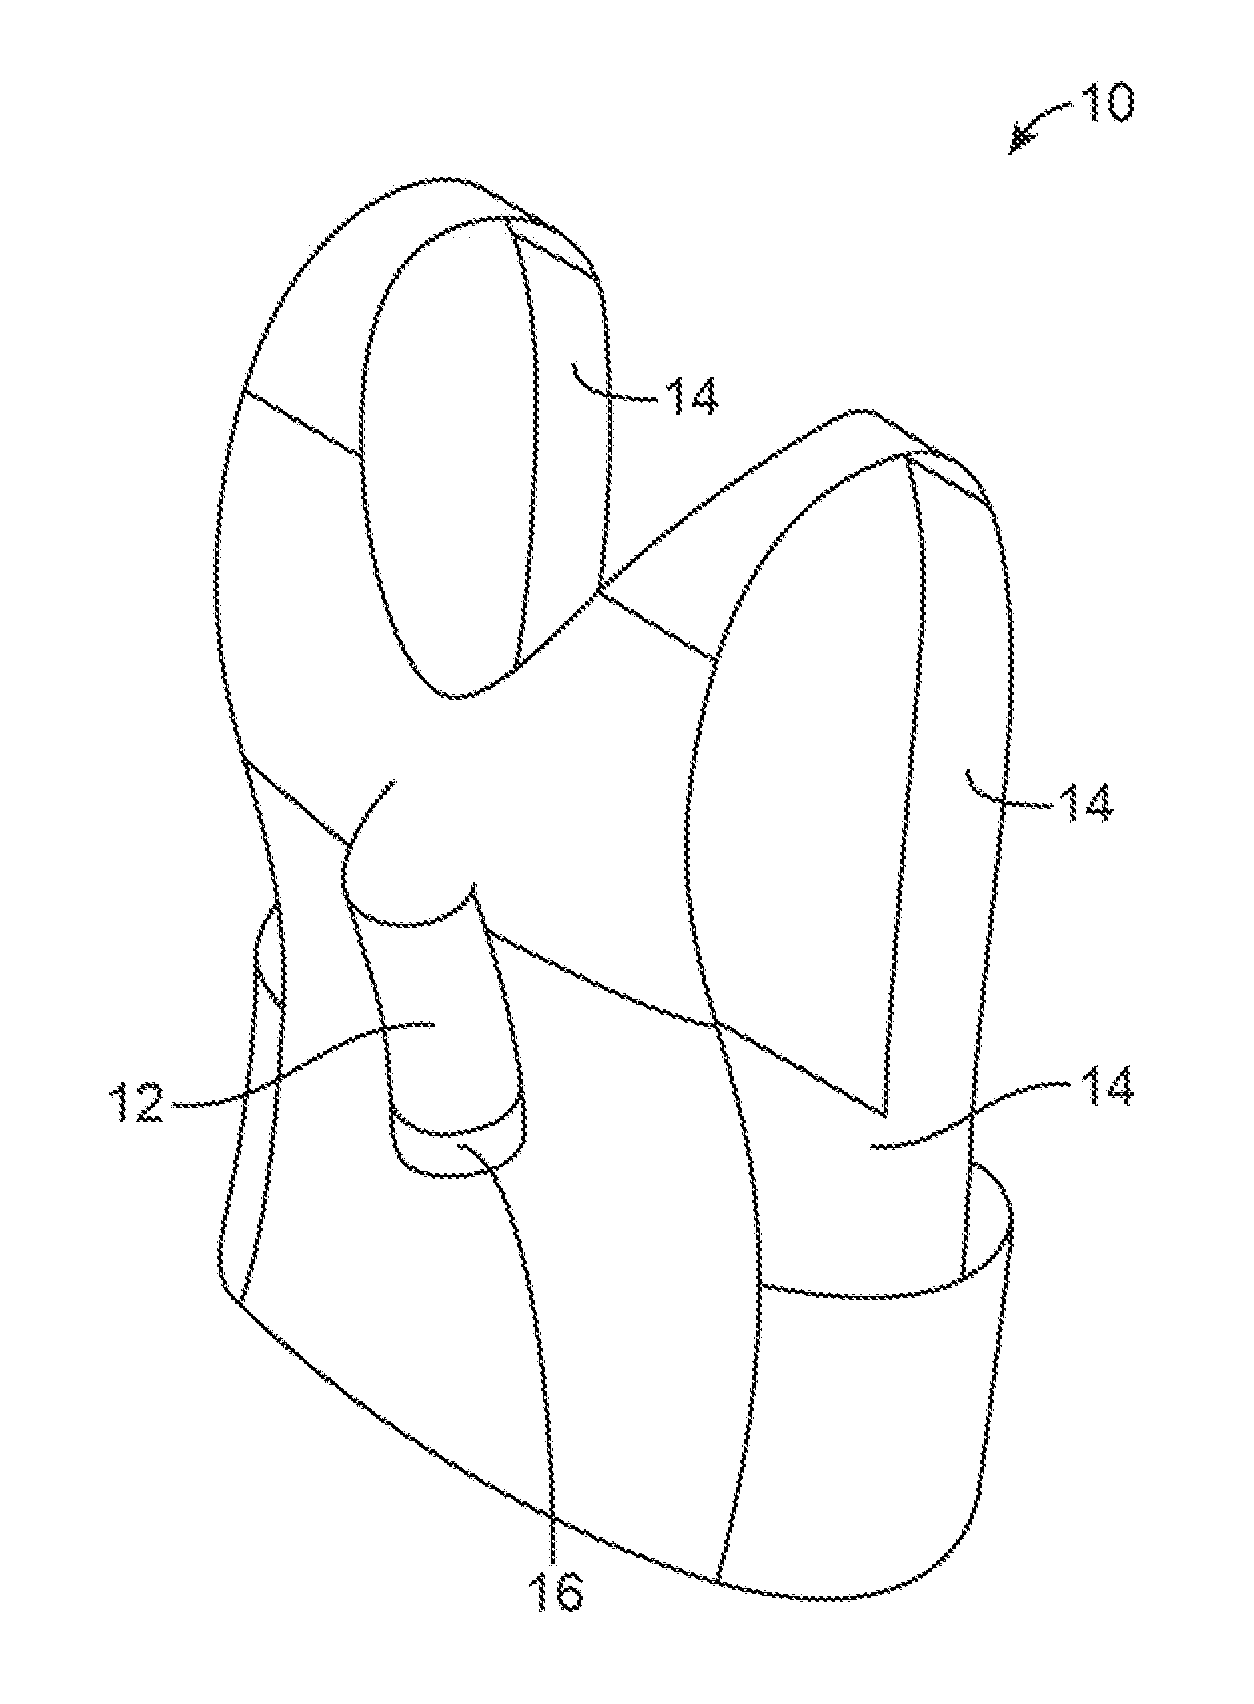 Wearable apparatus for the treatment or prevention of osteopenia and osteoporosis, stimulating bone growth, preserving or improving bone mineral density, and inhibiting adipogenesis